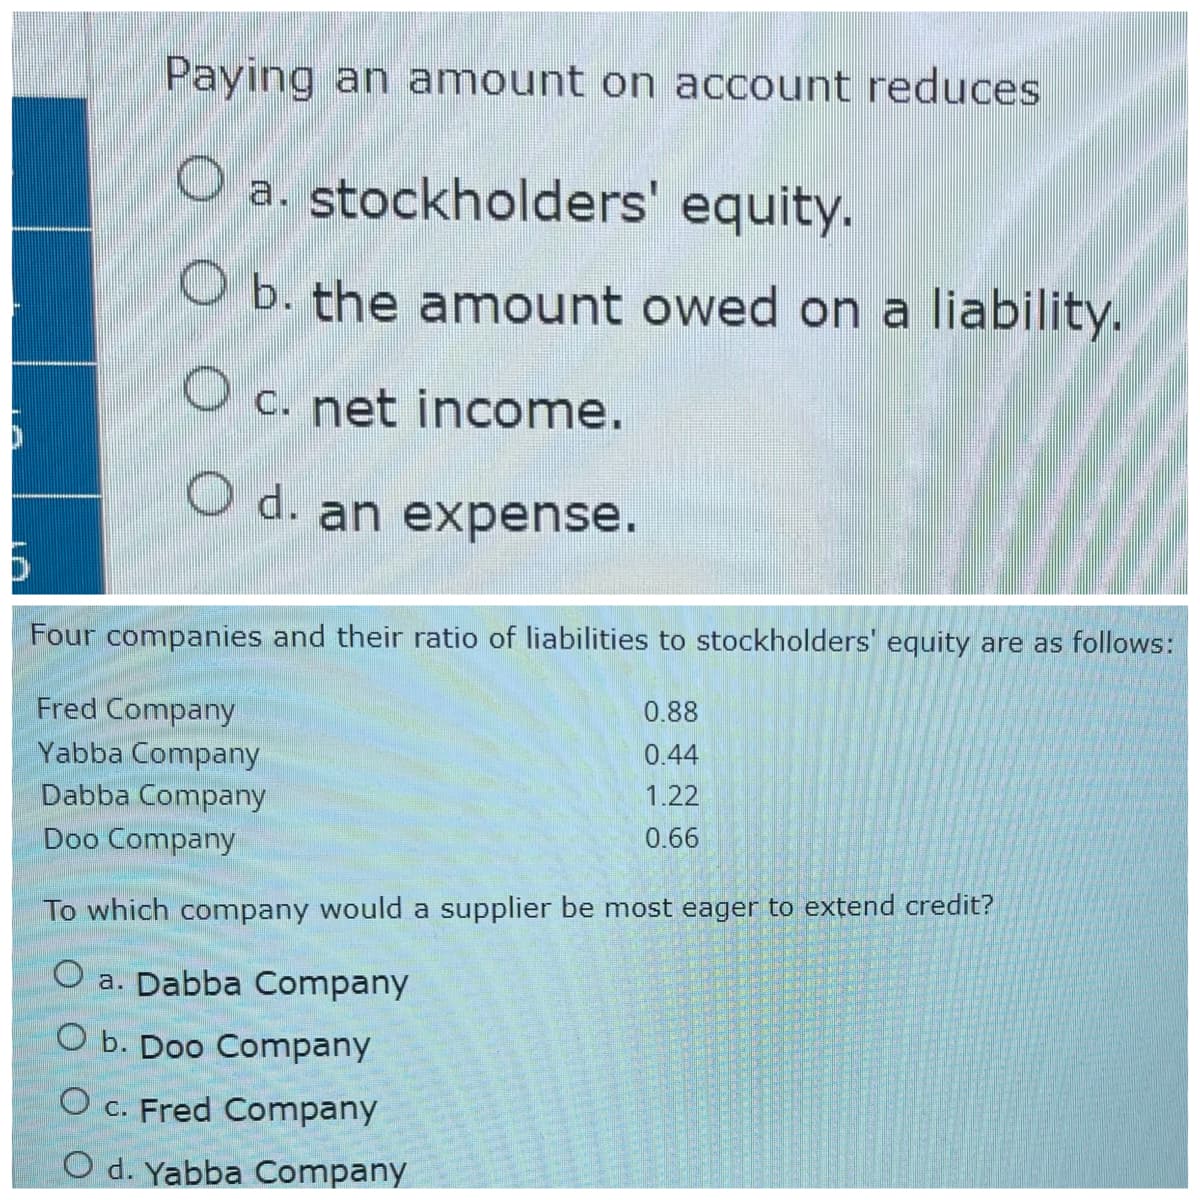 Paying an amount on account reduces
Oa.
a. stockholders' equity.
O b. the amount owed on a liability.
O c. net income.
O d. an expense.
6
Four companies and their ratio of liabilities to stockholders' equity are as follows:
0.88
Fred Company
0.44
Yabba Company
1.22
Dabba Company
0.66
Doo Company
To which company would a supplier be most eager to extend credit?
O a. Dabba Company
O b. Doo Company
O c. Fred Company
O d. Yabba Company